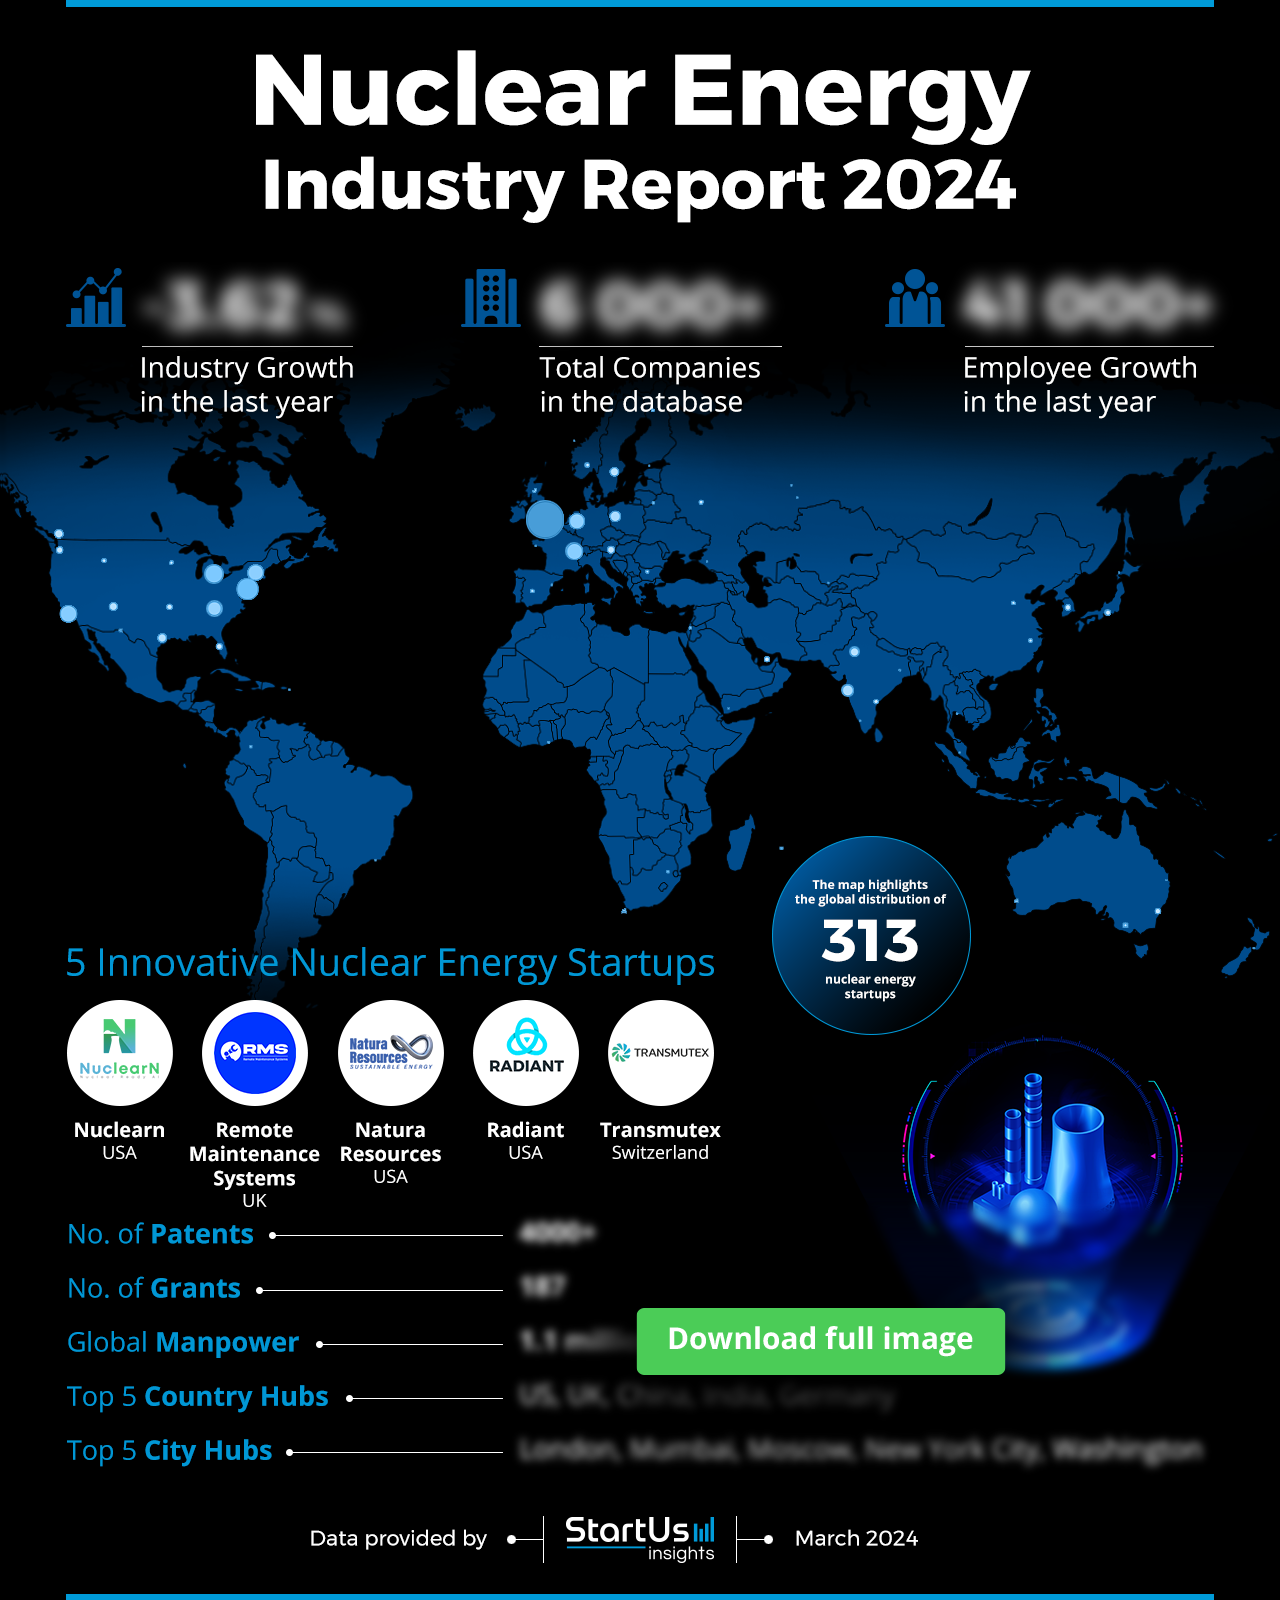 Nuclear-Energy-Industry-Report-HeatMap-Blurred-StartUs-Insights-noresize